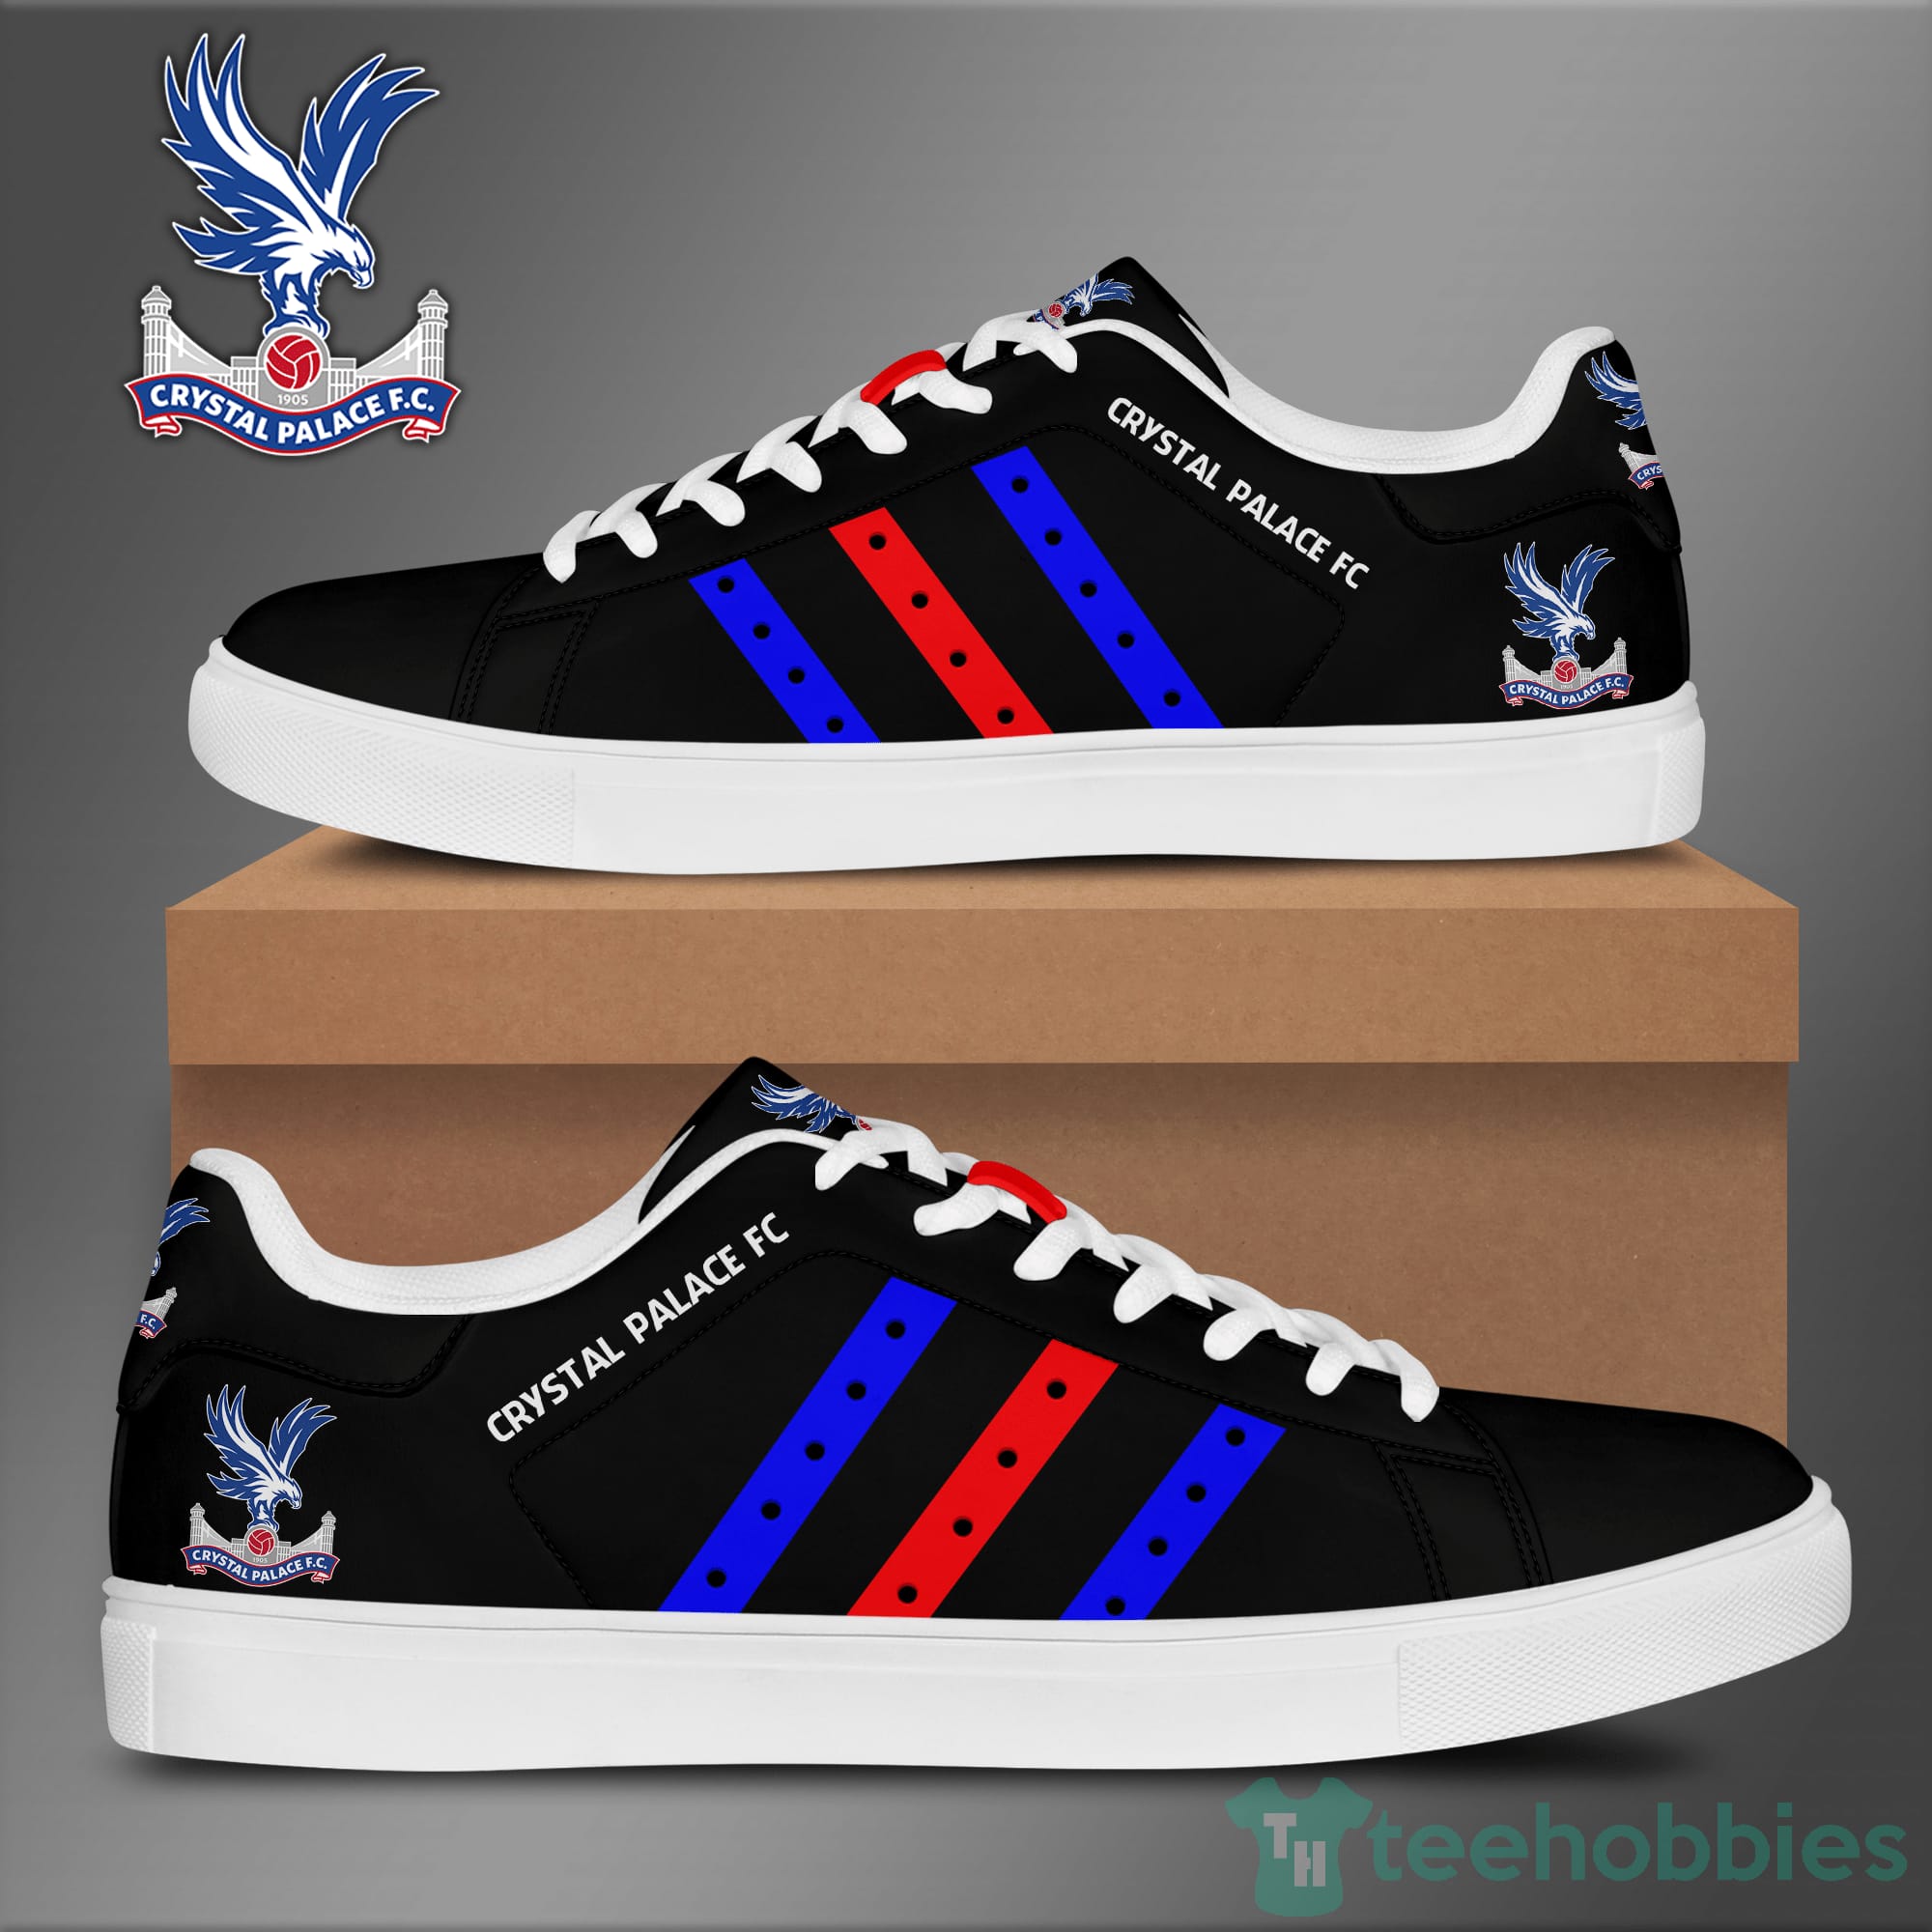 Crystal Palace Fc Black Low Top Skate Shoes Product photo 2